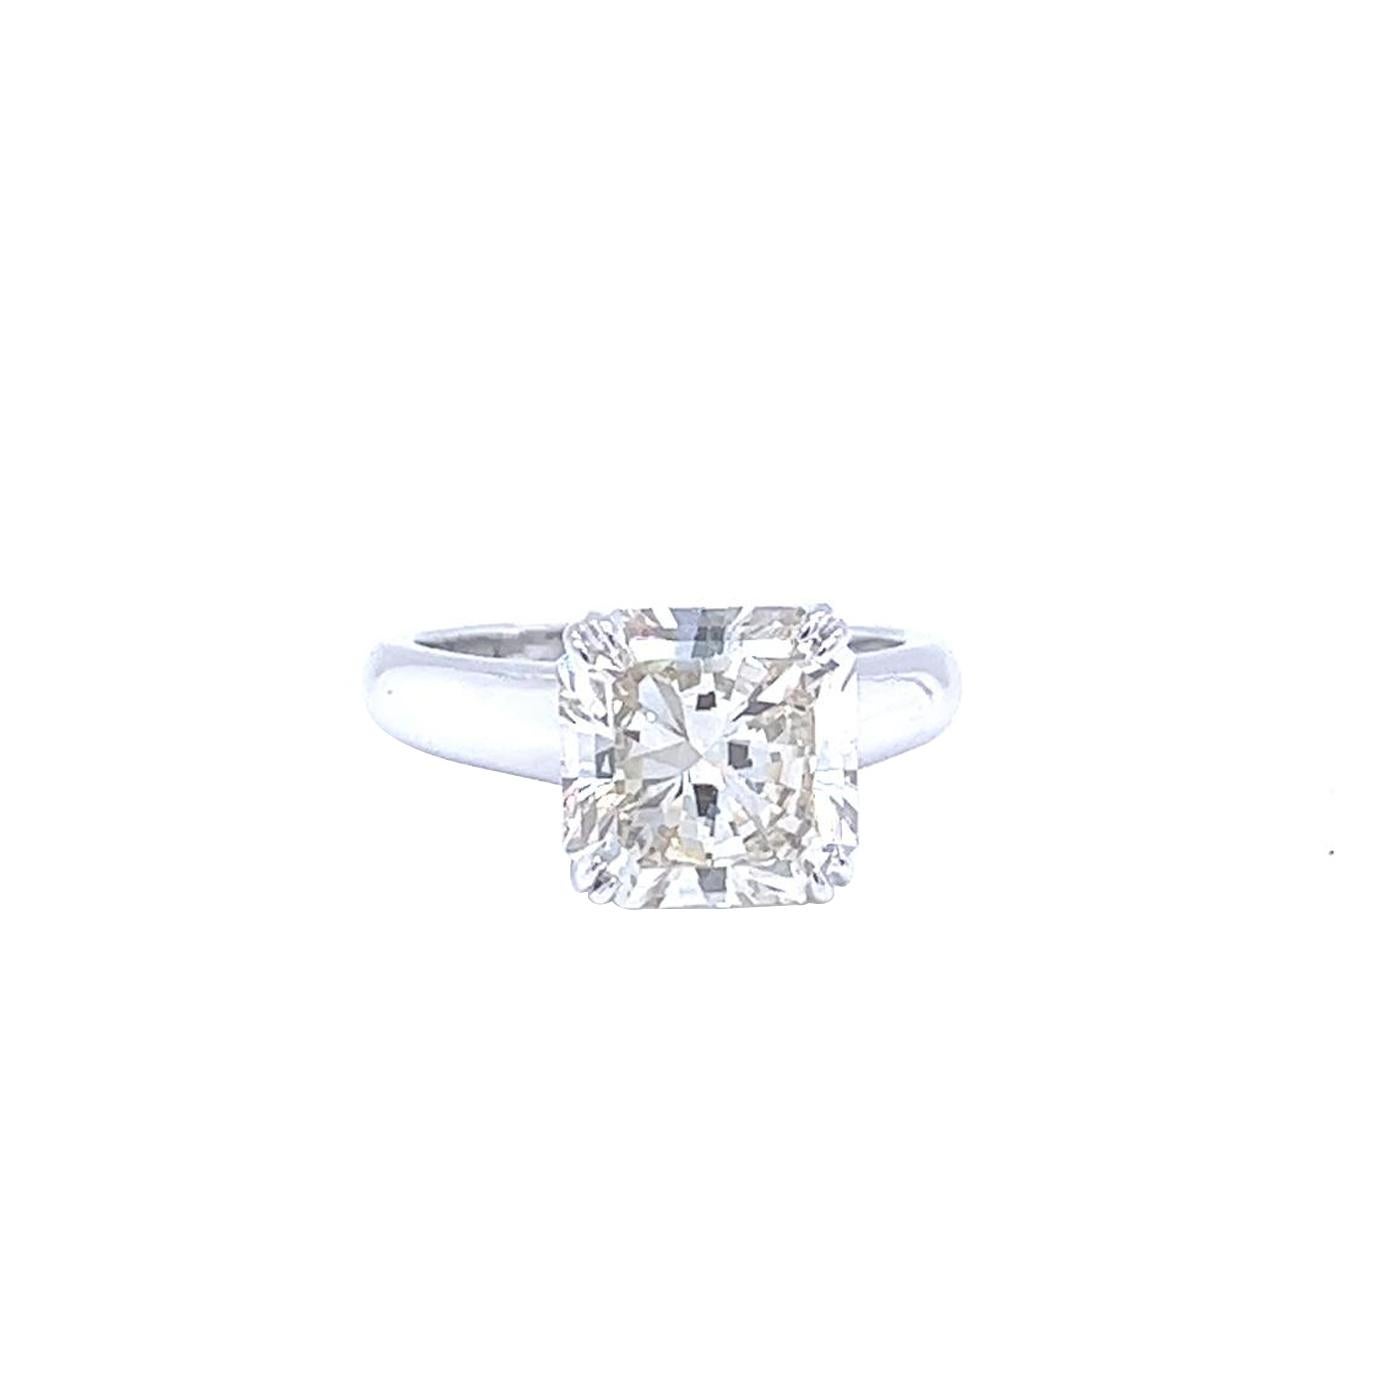 A gorgeous classy platinum diamond ring. The ring is set with a natural radiant cut diamond weighing 4.28ct, L color, and VS1 in clarity set within a classic mount. The ring is currently size 6 but can be adjusted for a perfect fit. This diamond is